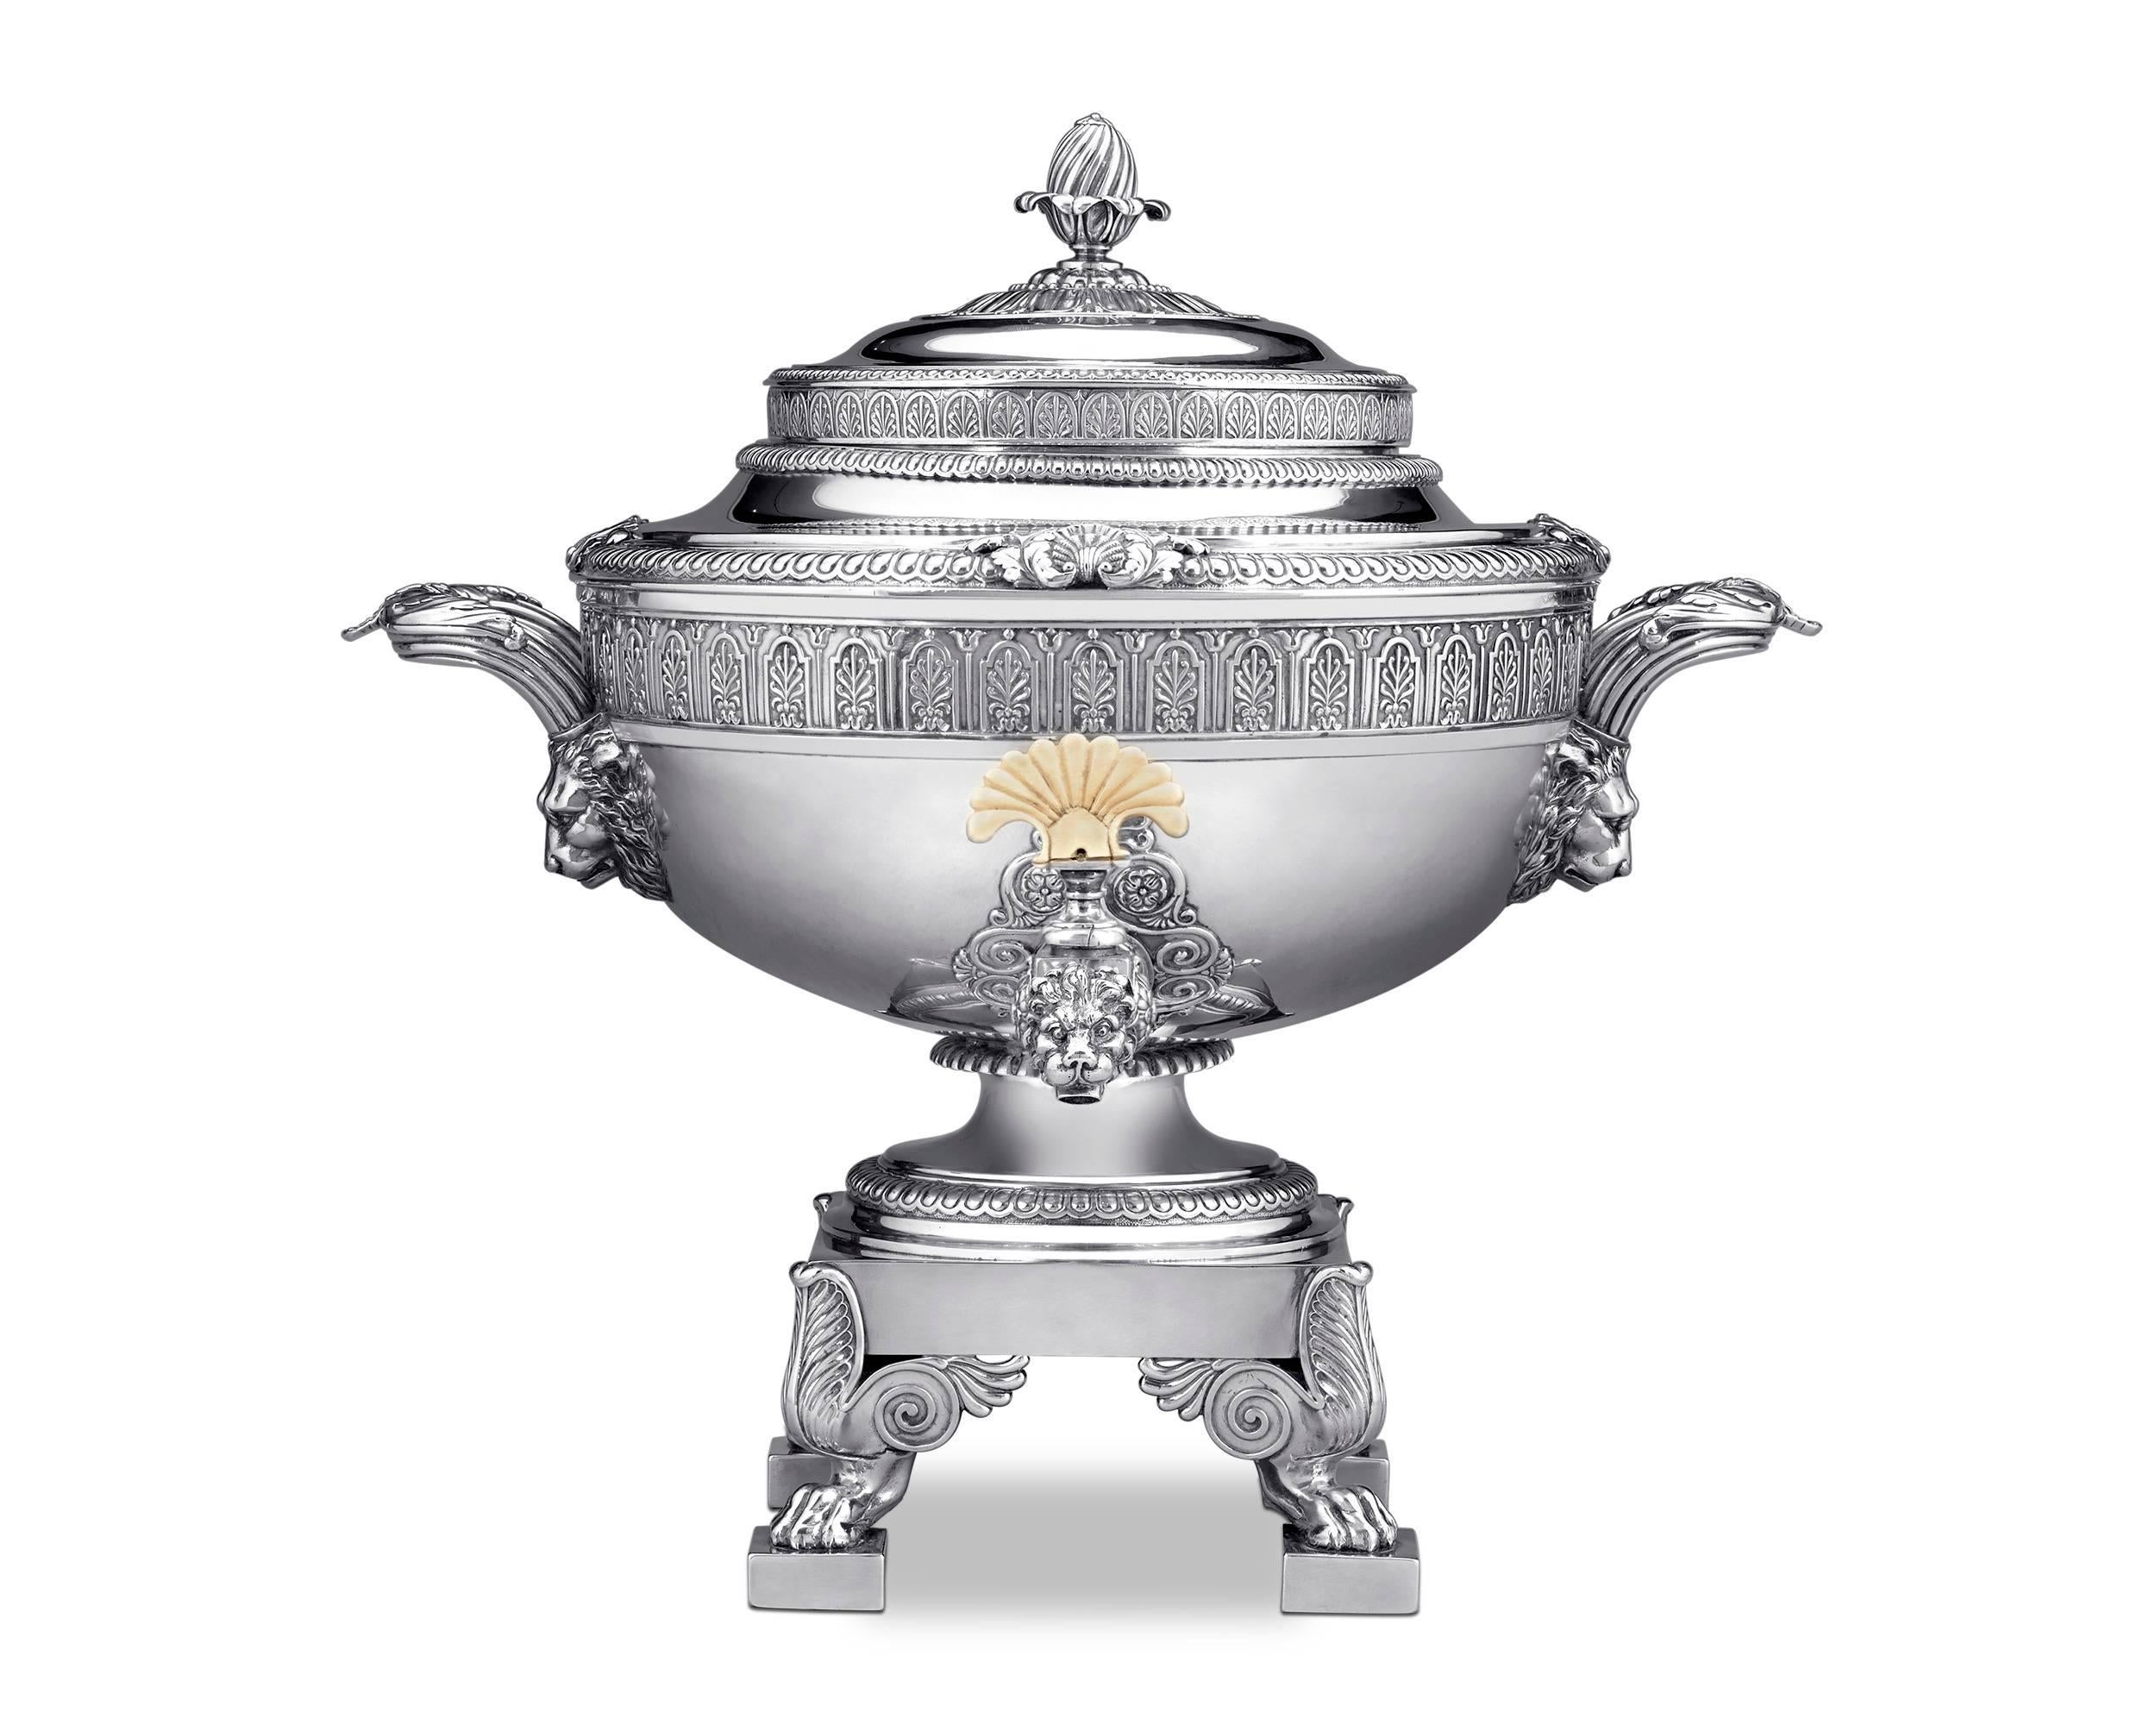 This extraordinarily rare and masterfully crafted tea urn is by the hand of the master Georgian silversmith Paul Storr. Created by Storr while working for Rundell, Bridge and Rundell, Jewelers and Goldsmiths to the King, this magnificent piece truly